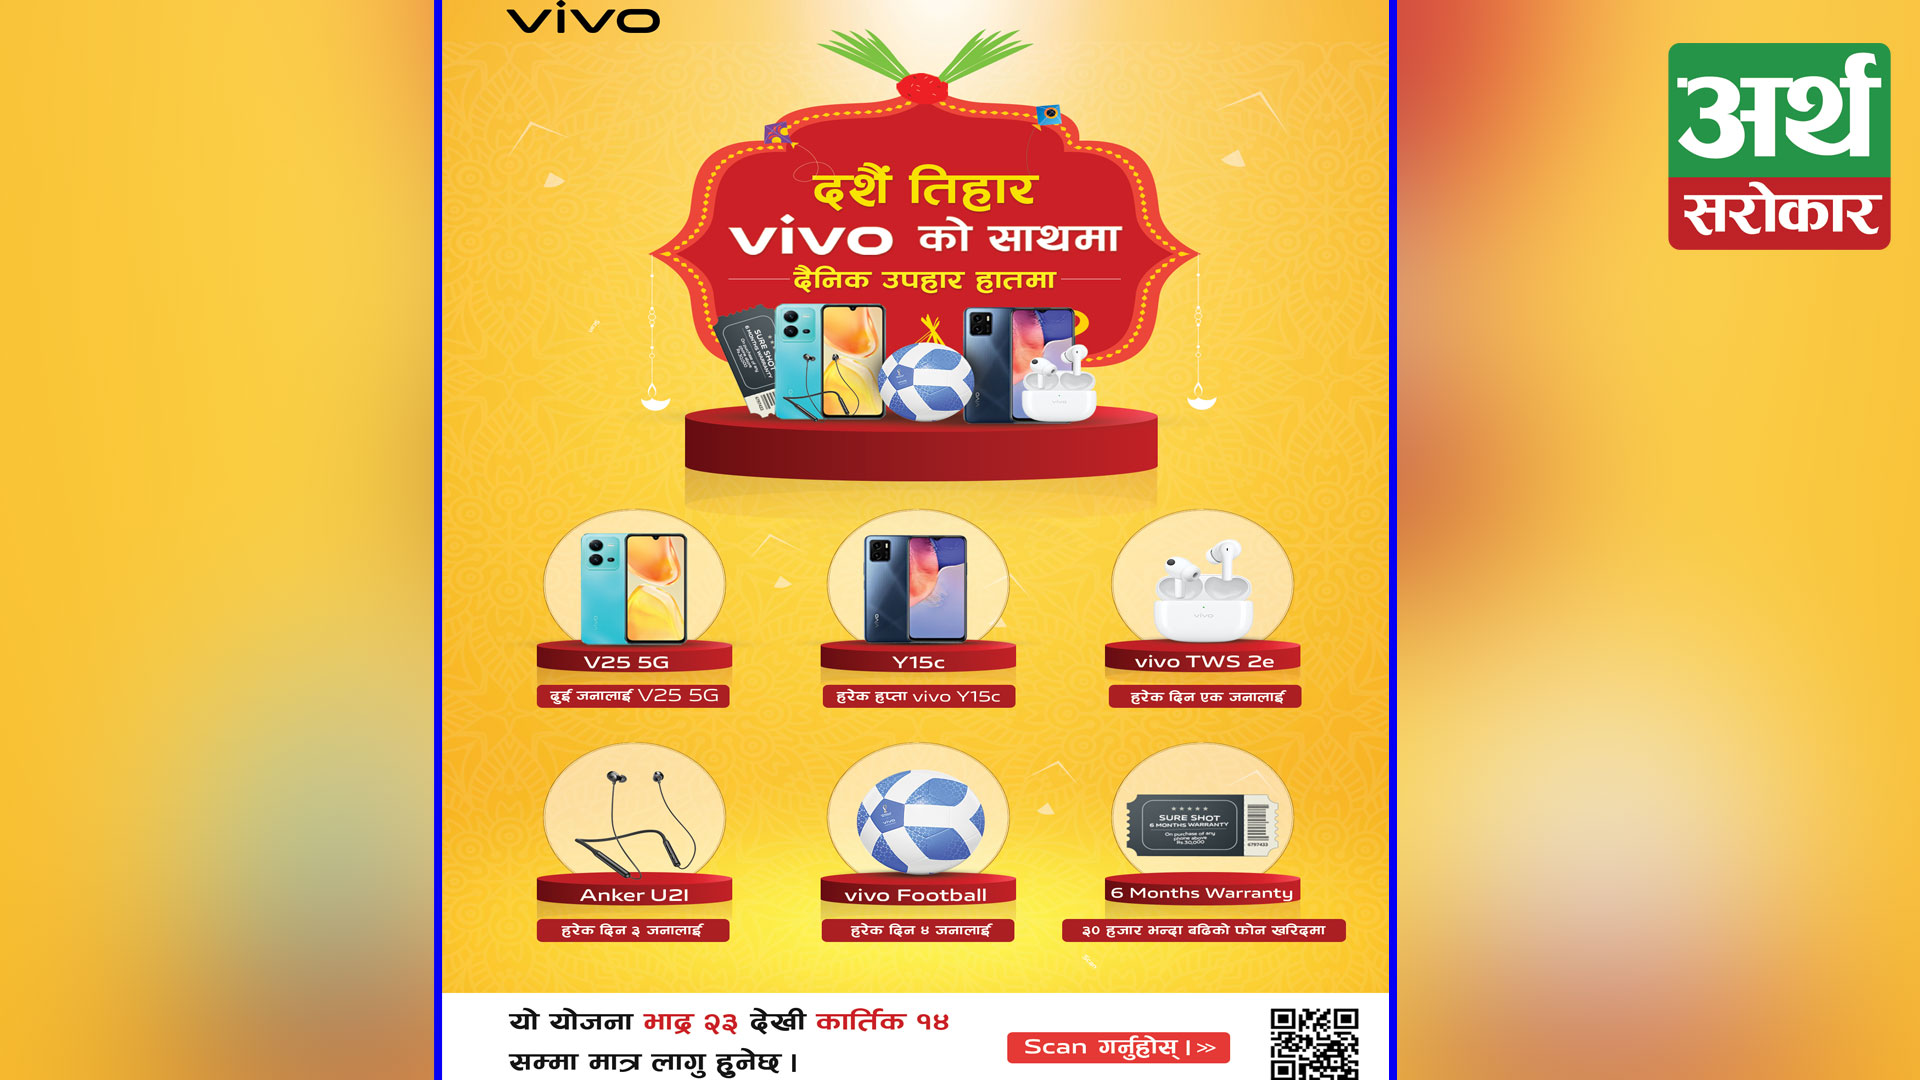 Vivo Celebrates This Dashain by Announcing Attractive Offers and Deals for its Loyal Customers